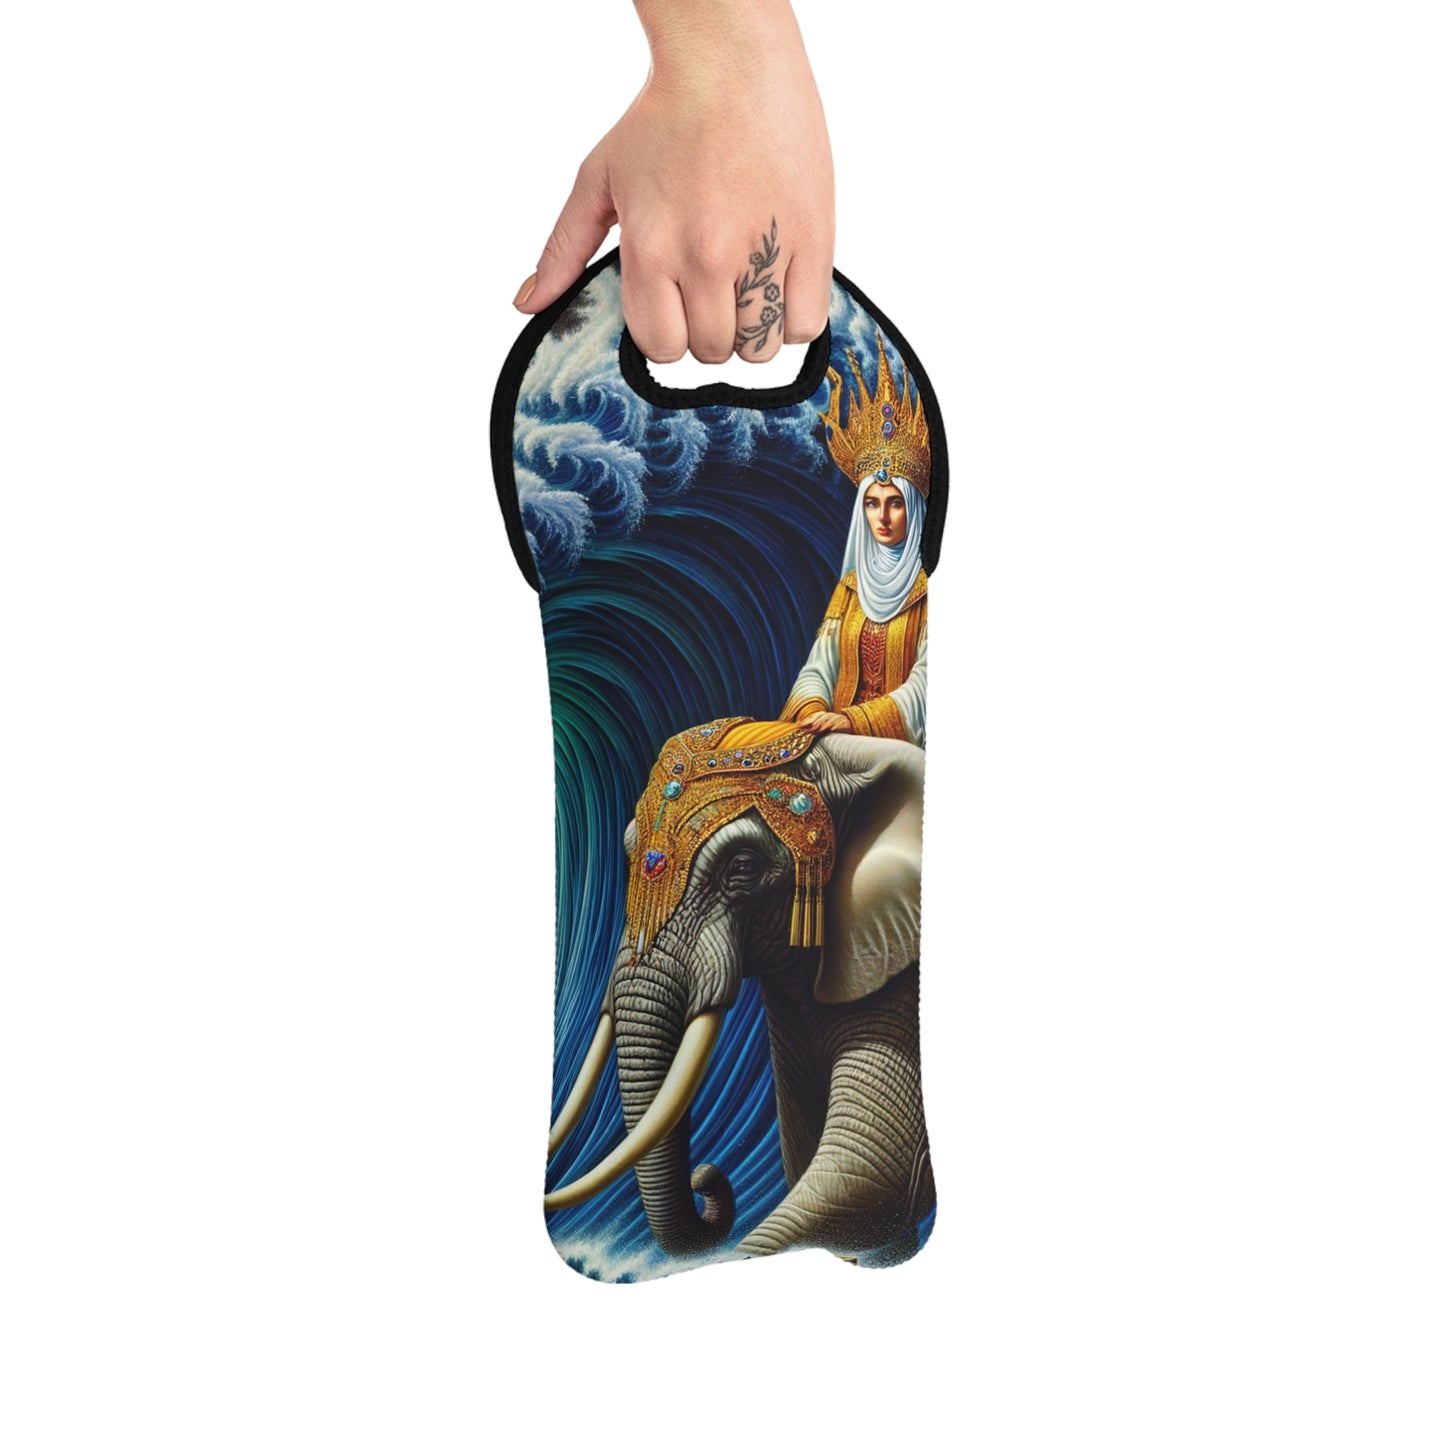 "The Wondrous Ride" - The Alien Wine Tote Bag Surrealism Style